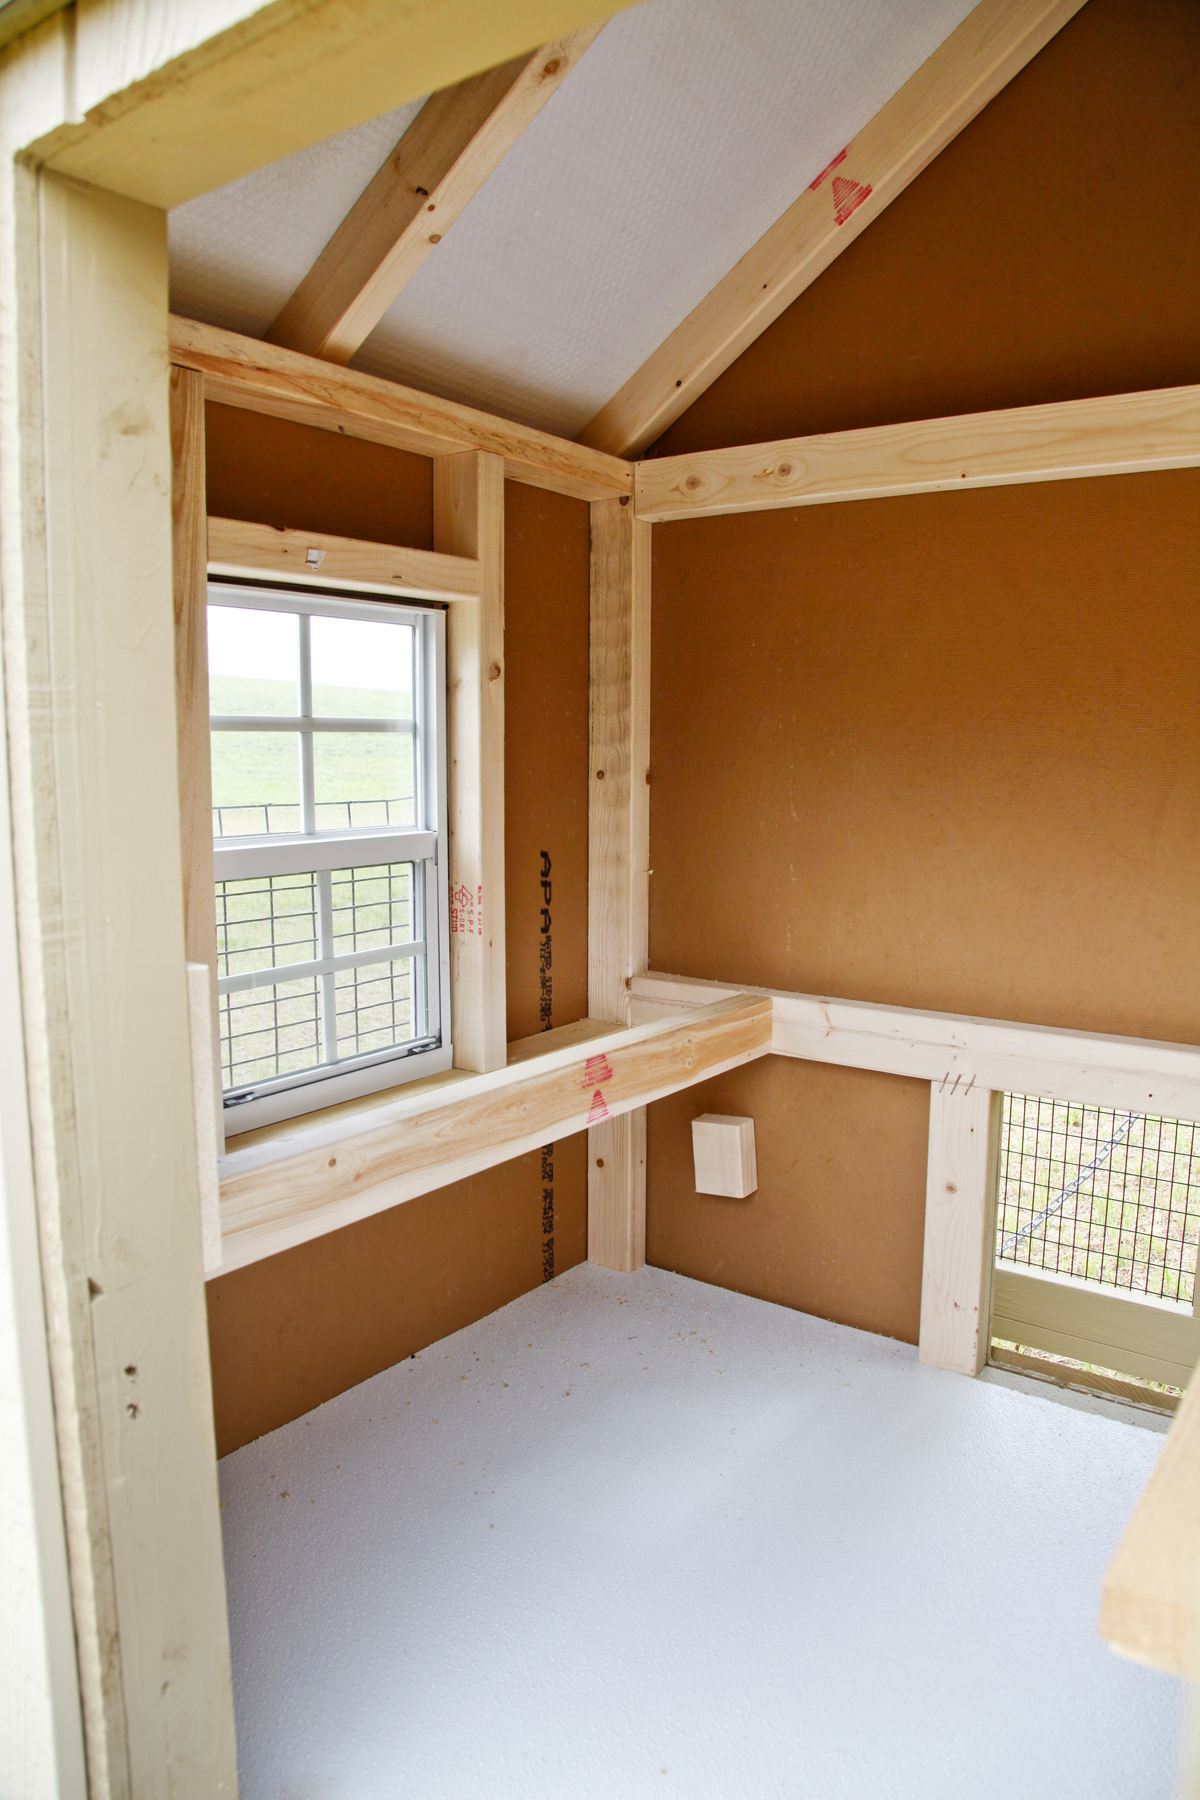 Interior of a 4x6 A-Frame Combination chicken coop